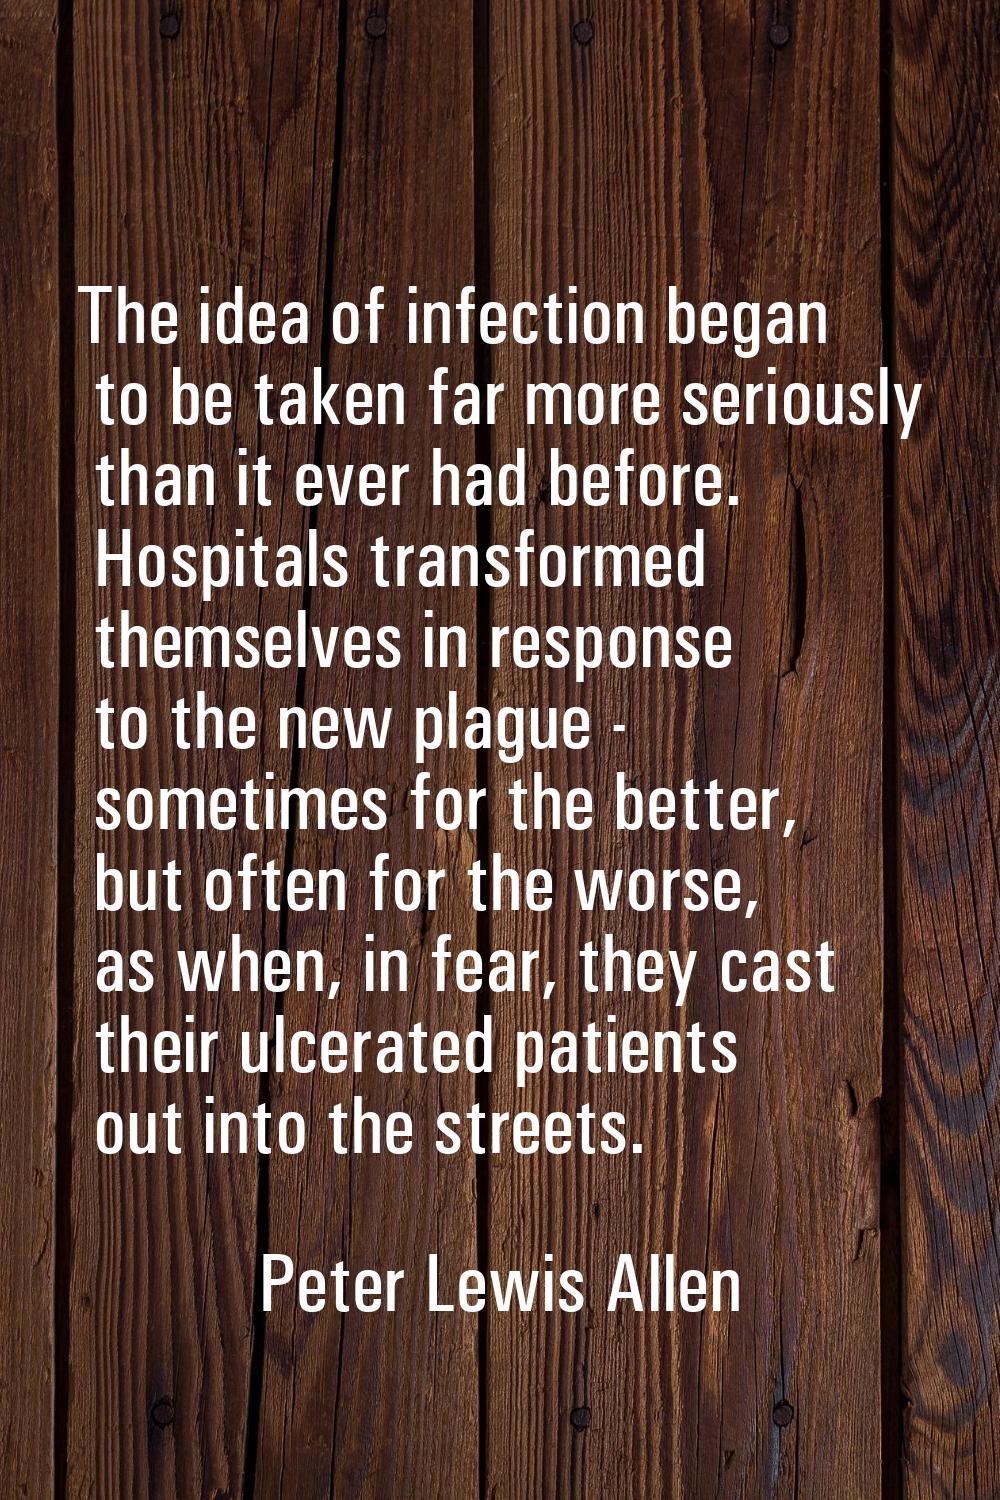 The idea of infection began to be taken far more seriously than it ever had before. Hospitals trans